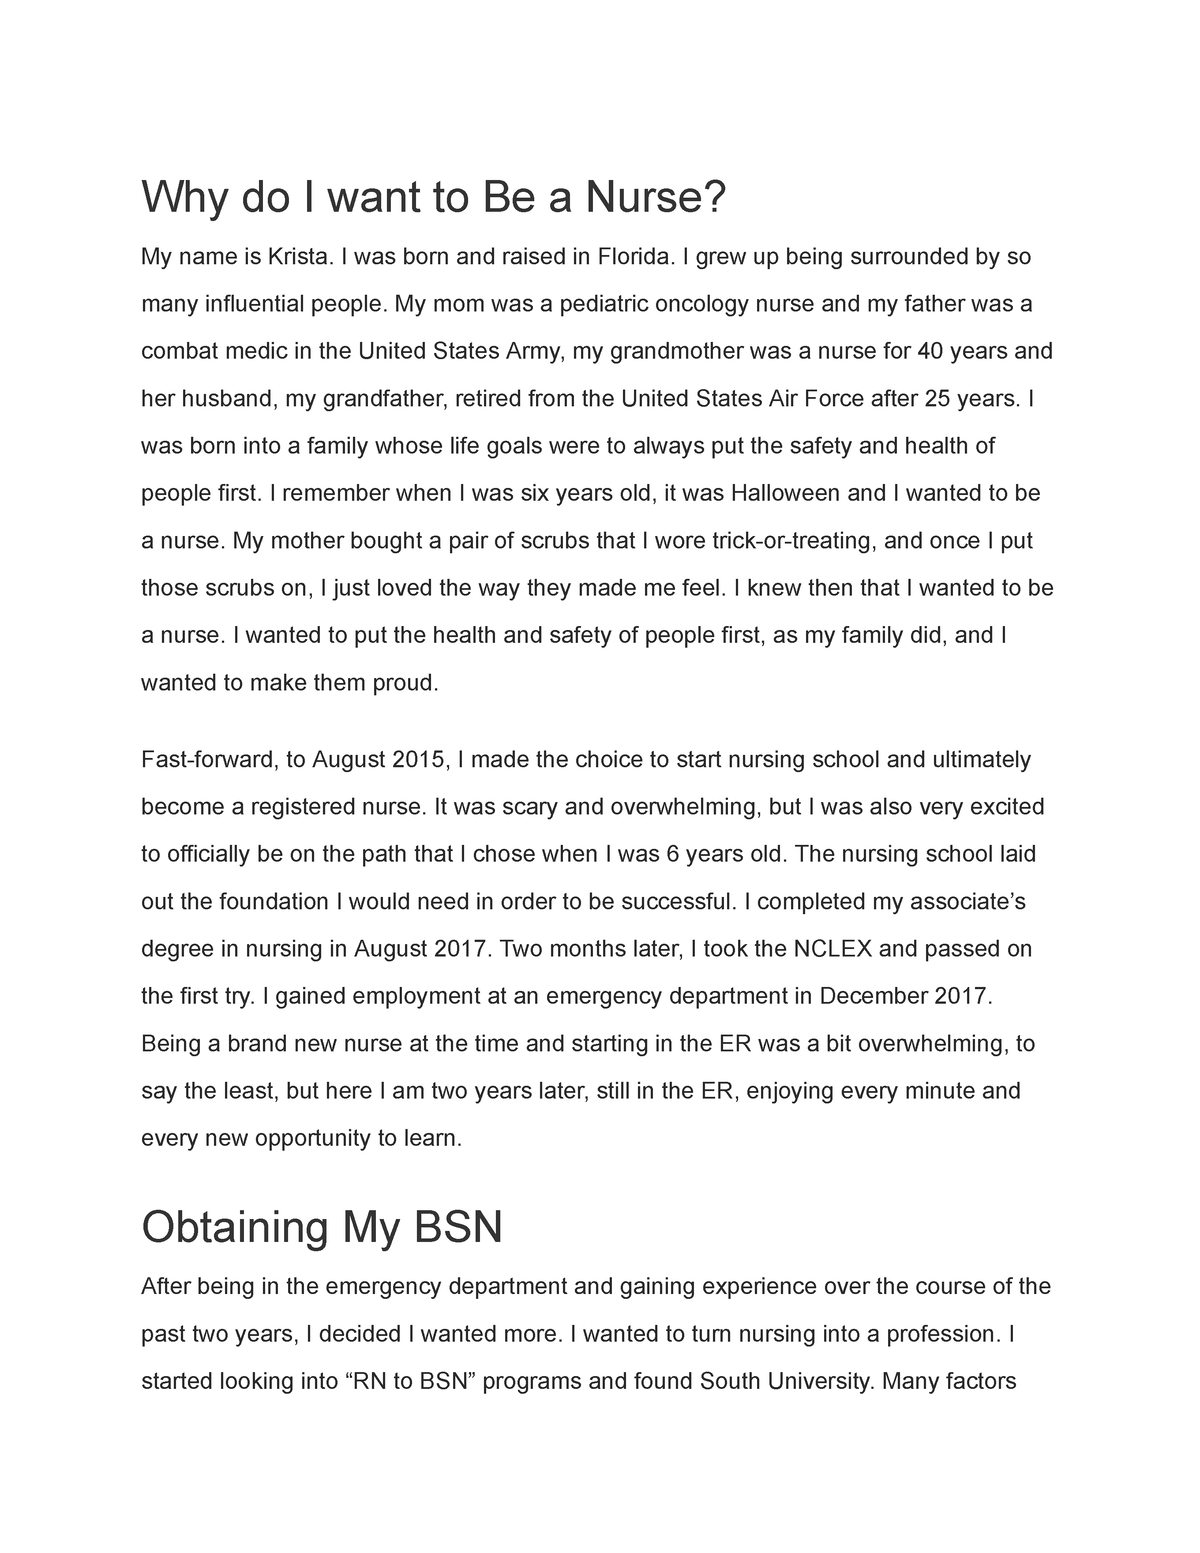 200 word essay on why i want to be a nurse